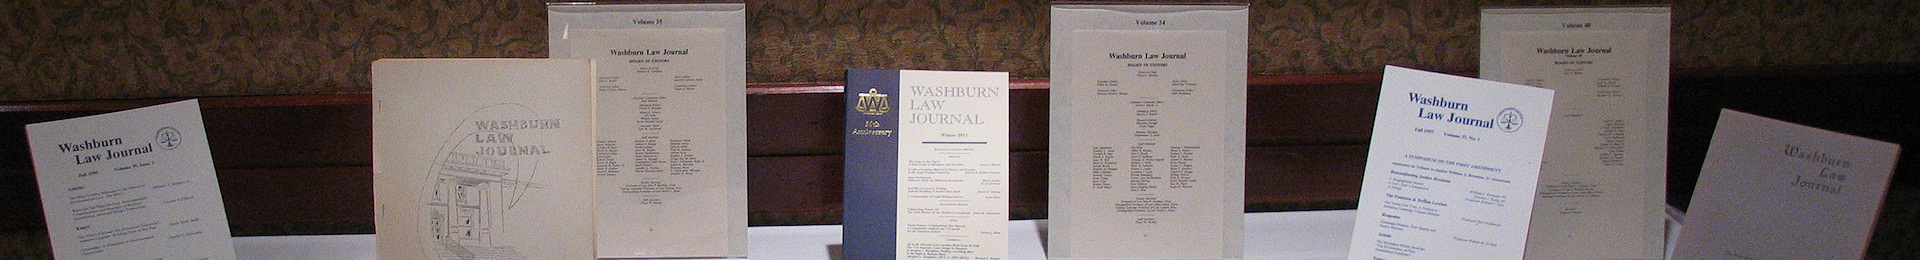 Photograph: Covers of various volumes of Washburn Law Journal volumes.